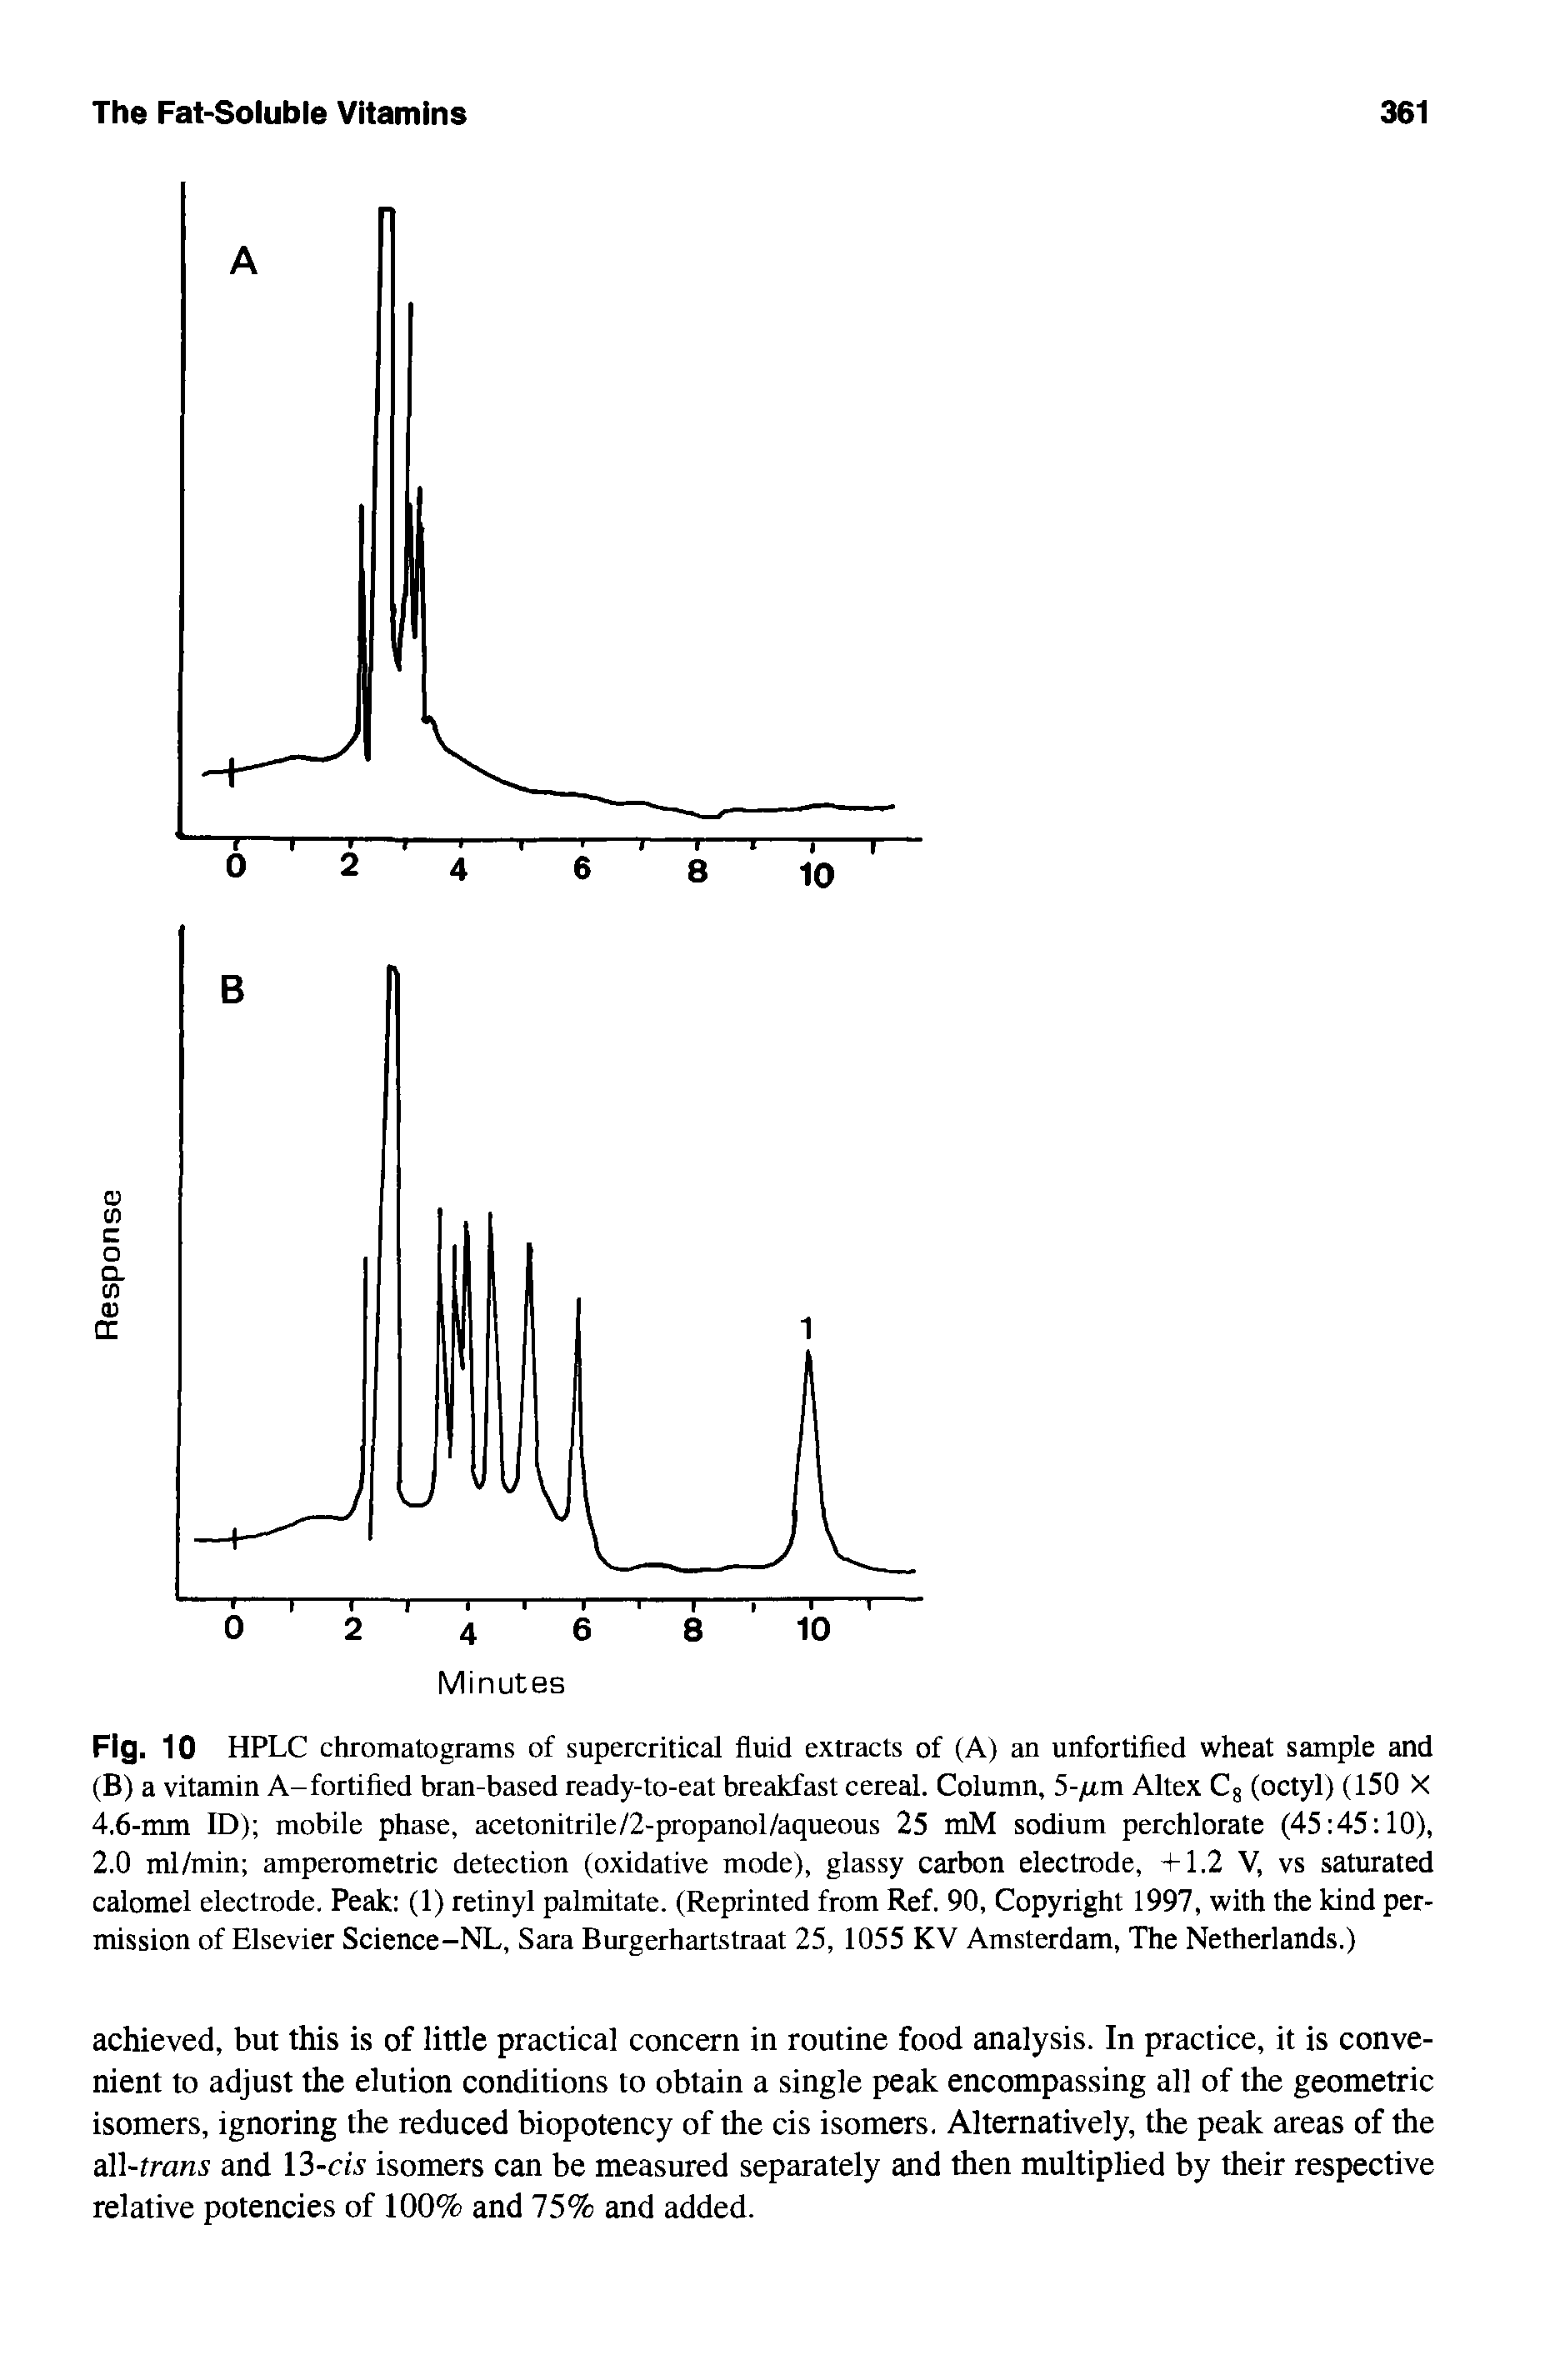 Fig. 10 HPLC chromatograms of supercritical fluid extracts of (A) an unfortified wheat sample and (B) a vitamin A-fortified bran-based ready-to-eat breakfast cereal. Column, 5-/rm Altex C8 (octyl) (150 X 4.6-mm ID) mobile phase, acetonitrile/2-propanol/aqueous 25 mM sodium perchlorate (45 45 10), 2.0 ml/min amperometric detection (oxidative mode), glassy carbon electrode, +1.2 V, vs saturated calomel electrode. Peak (1) retinyl palmitate. (Reprinted from Ref. 90, Copyright 1997, with the kind permission of Elsevier Science-NL, Sara Burgerhartstraat 25, 1055 KV Amsterdam, The Netherlands.)...